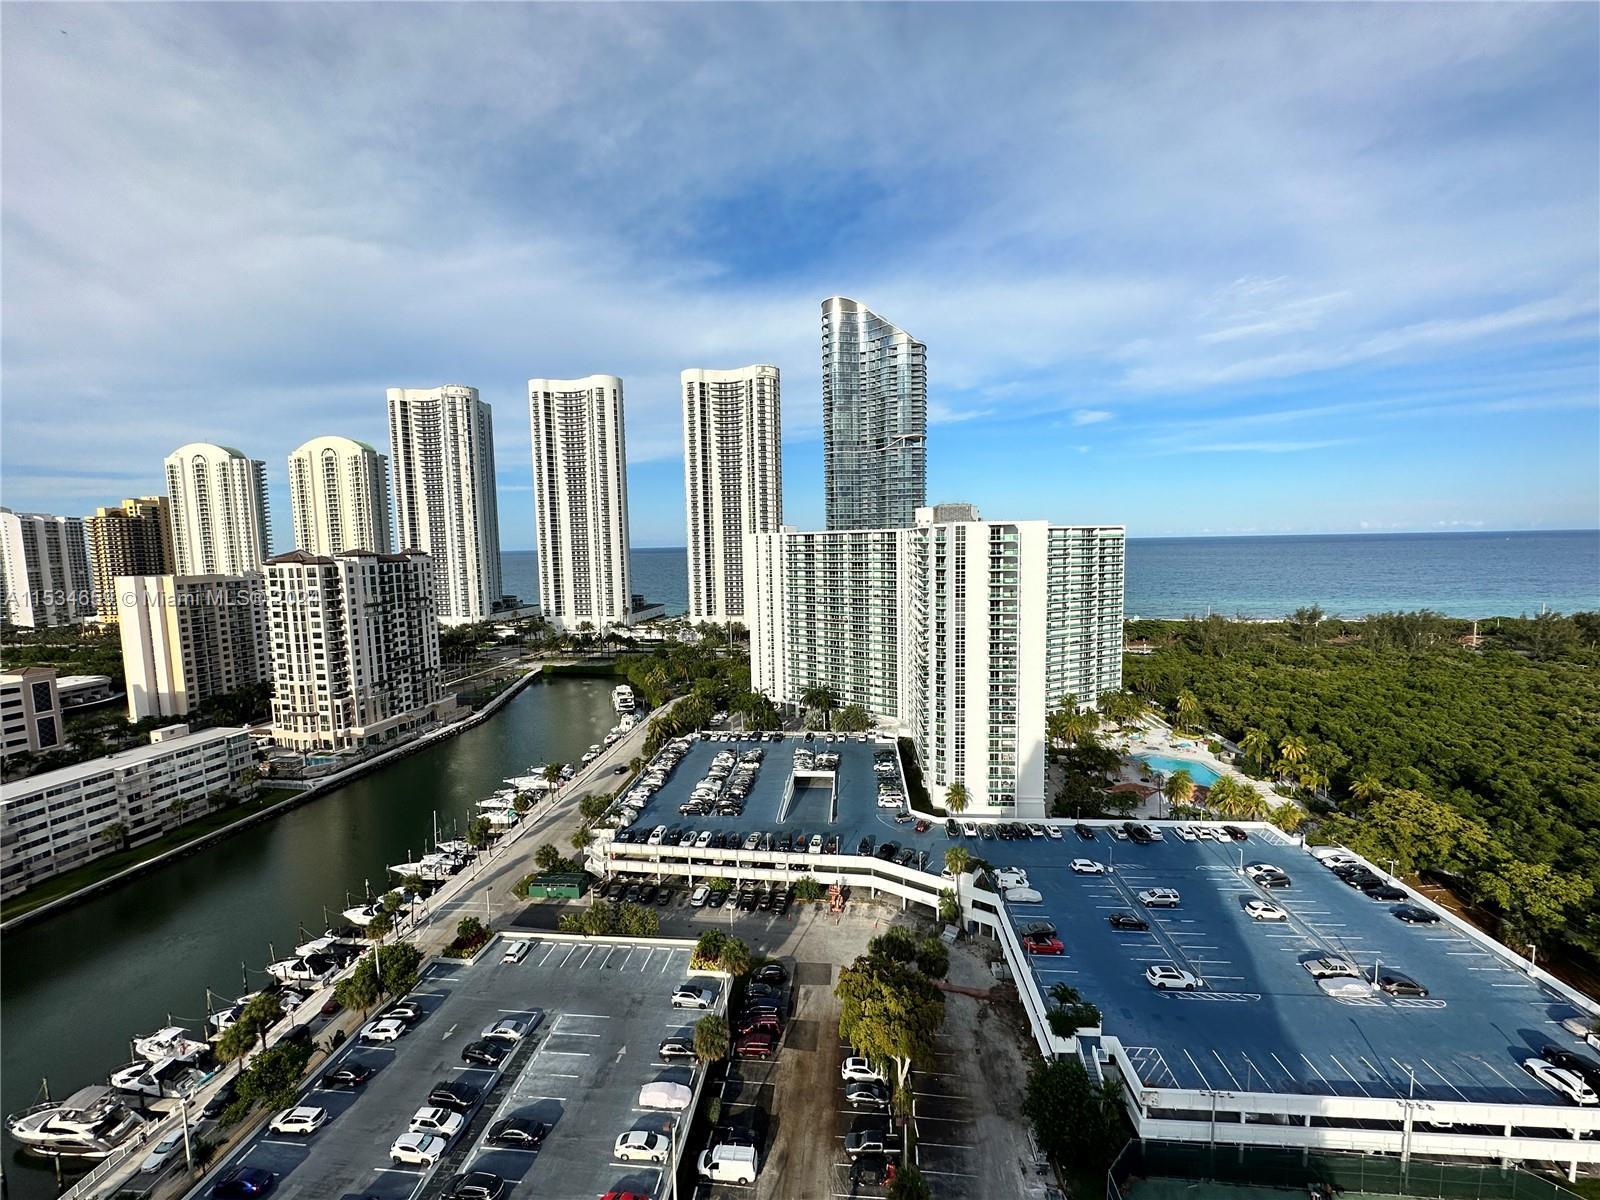 ONE OF THE BEST CORNER UNITS IN SUNNY ISLES BEACH! DIRECT 270 DEGREE VIEWS OF OCEAN, INTRACOASTAL, S